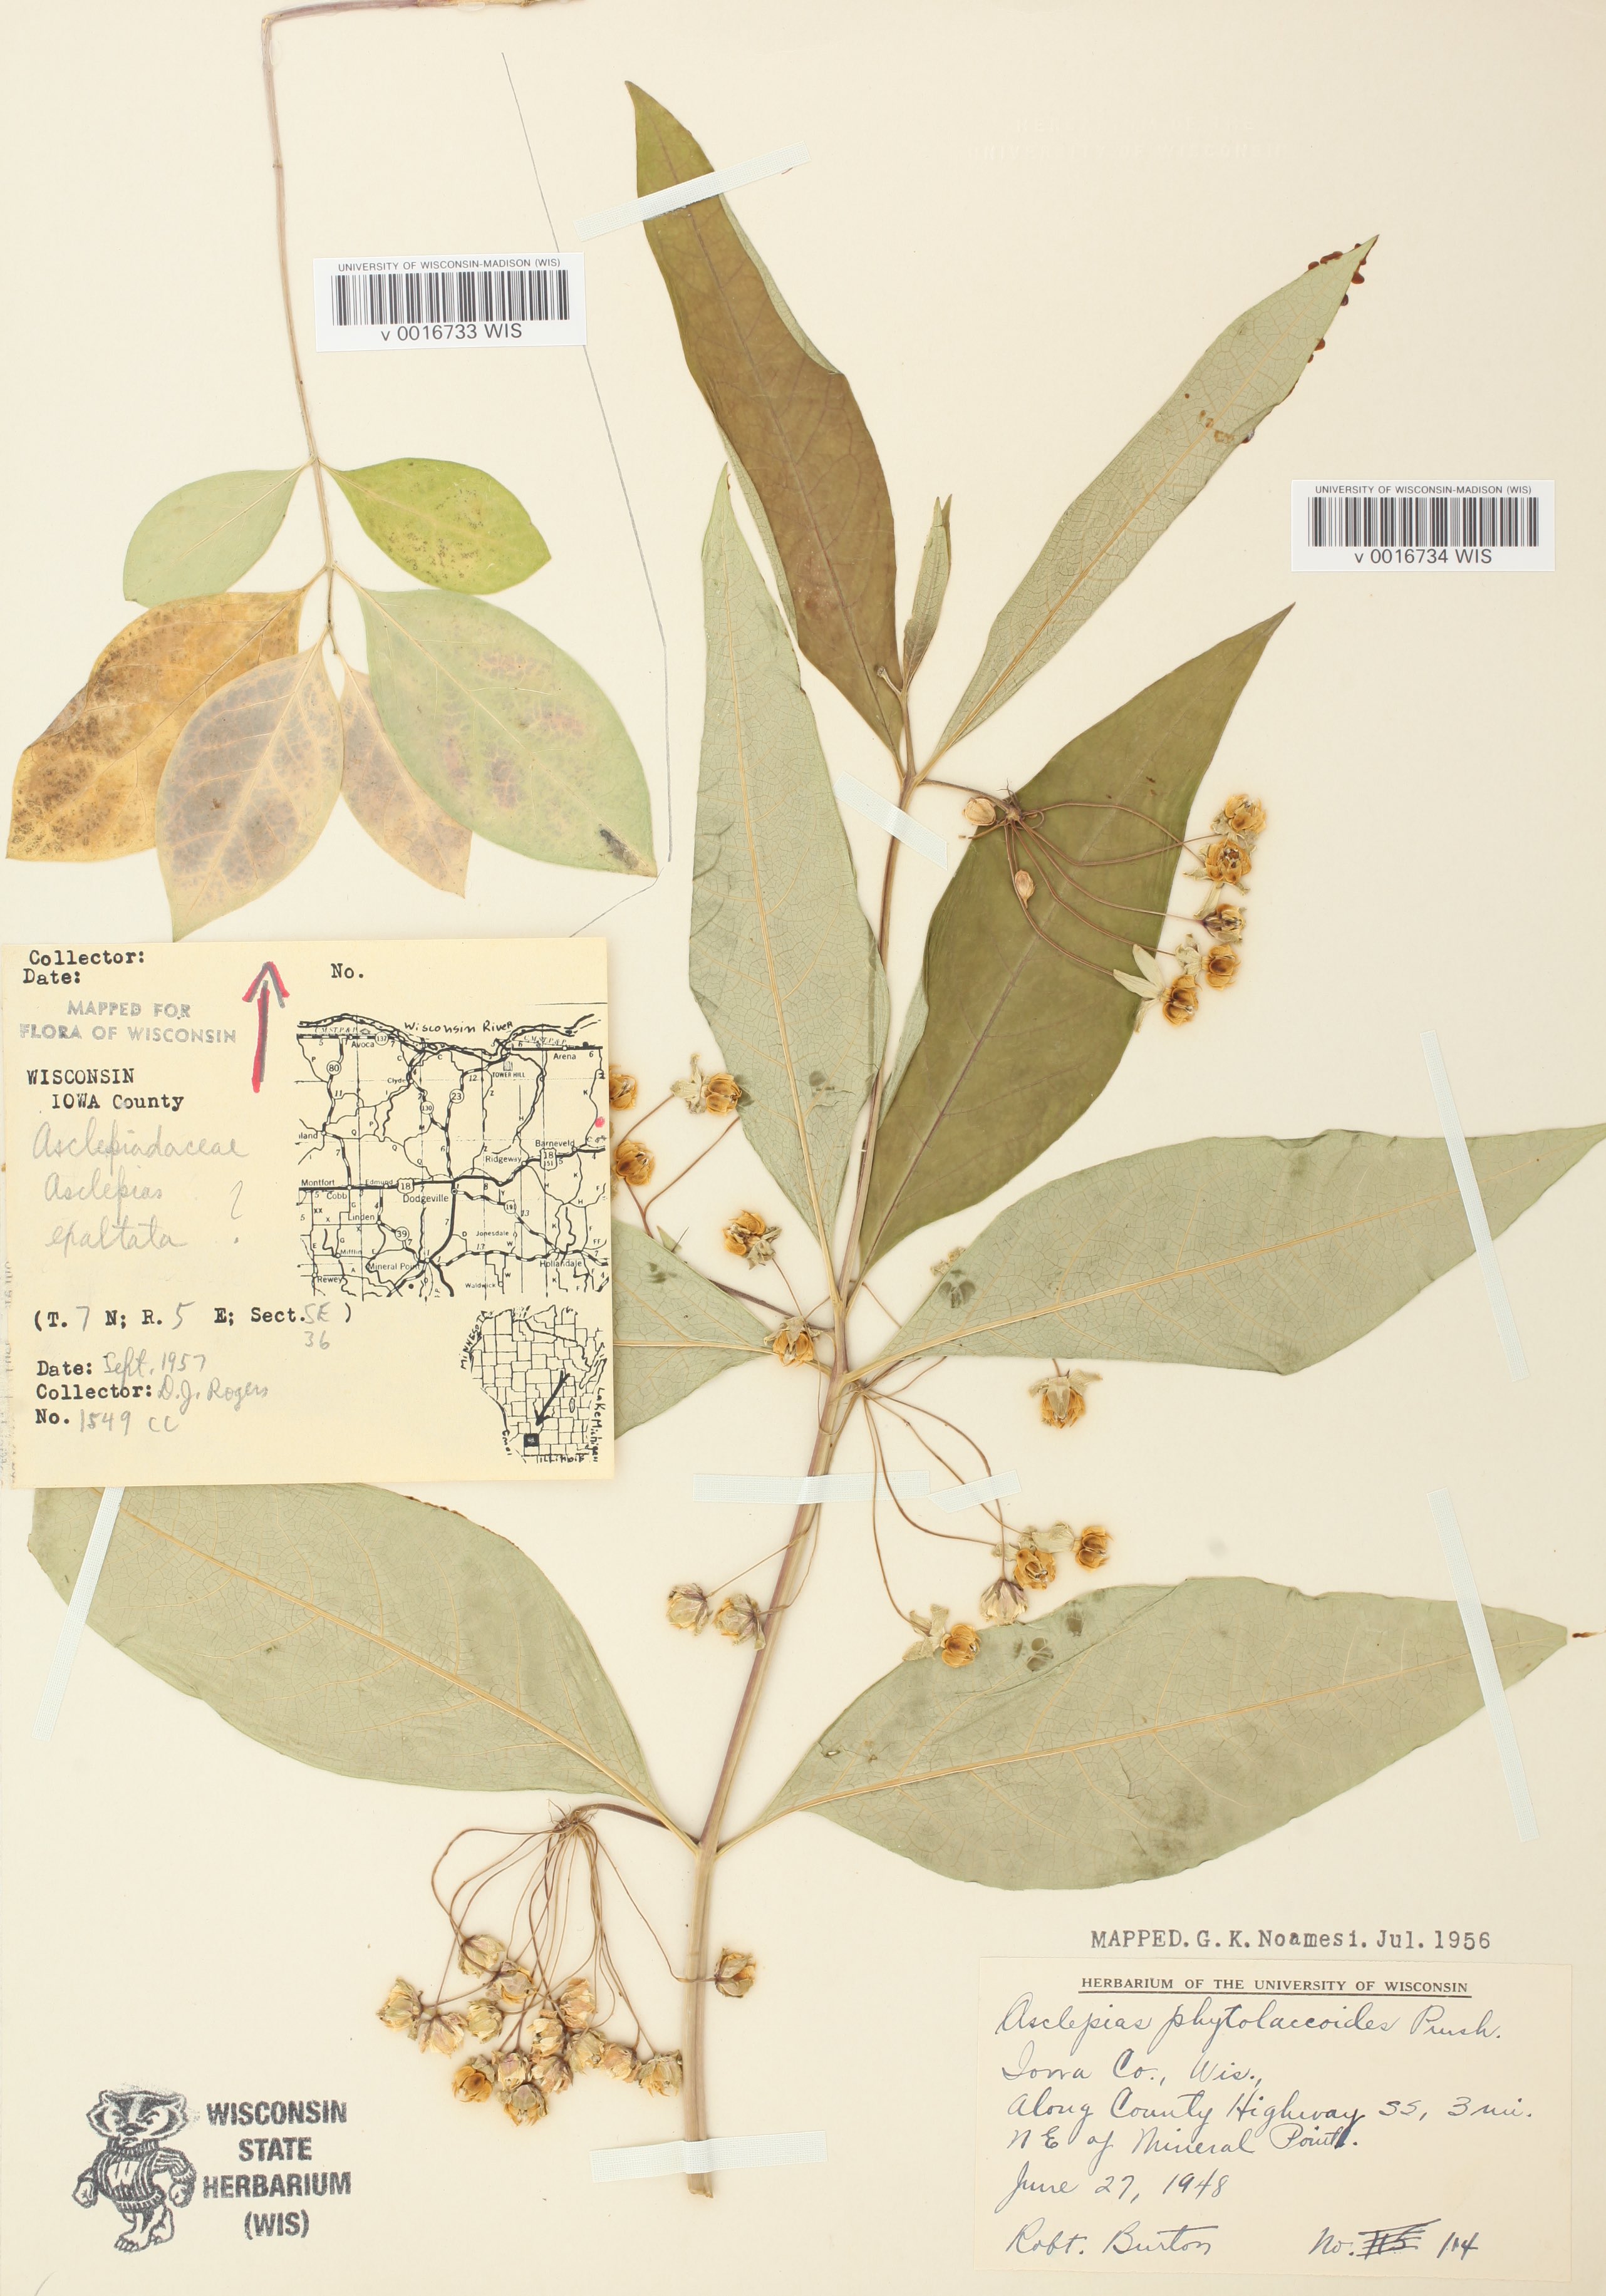 Poke Milkweed specimen collected in Iowa County near Mineral Point on June 27, 1948.